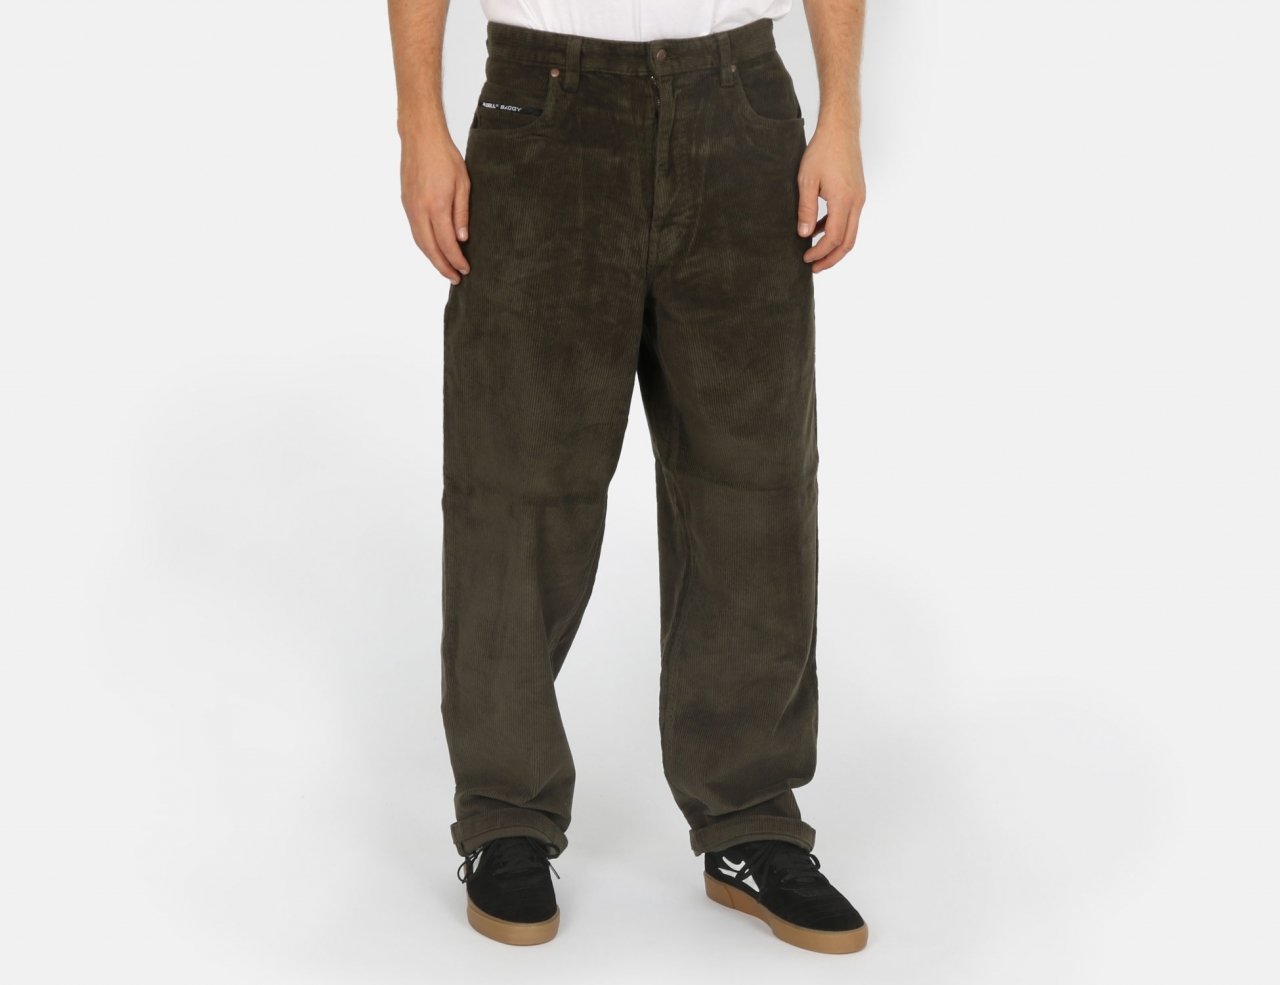 Reell Jeans Baggy Cord Pant - Dark Green